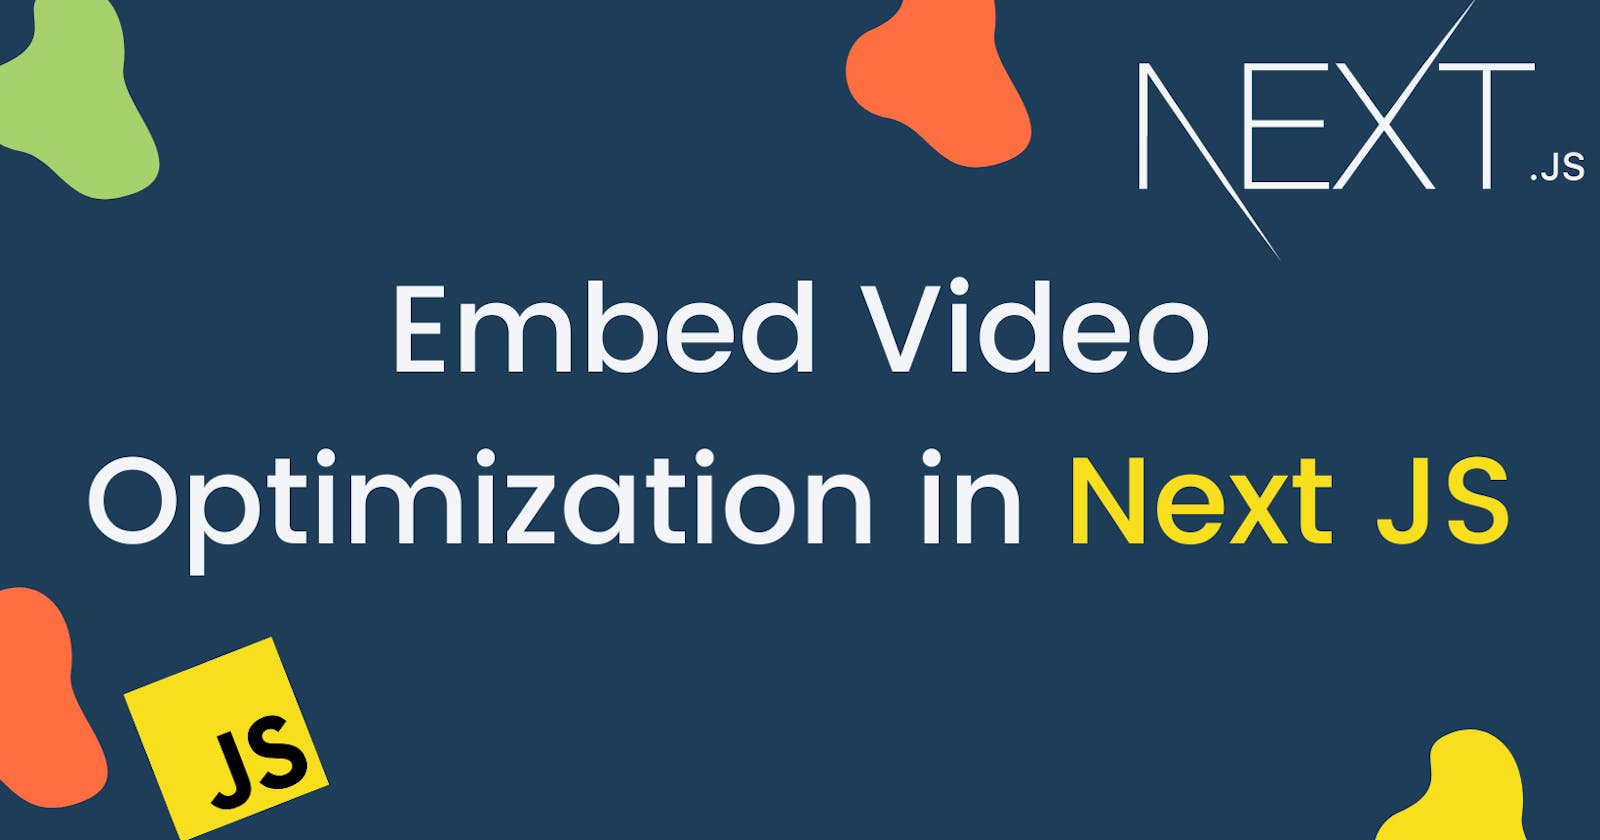 Lazy load embed videos by using facade image in Next JS